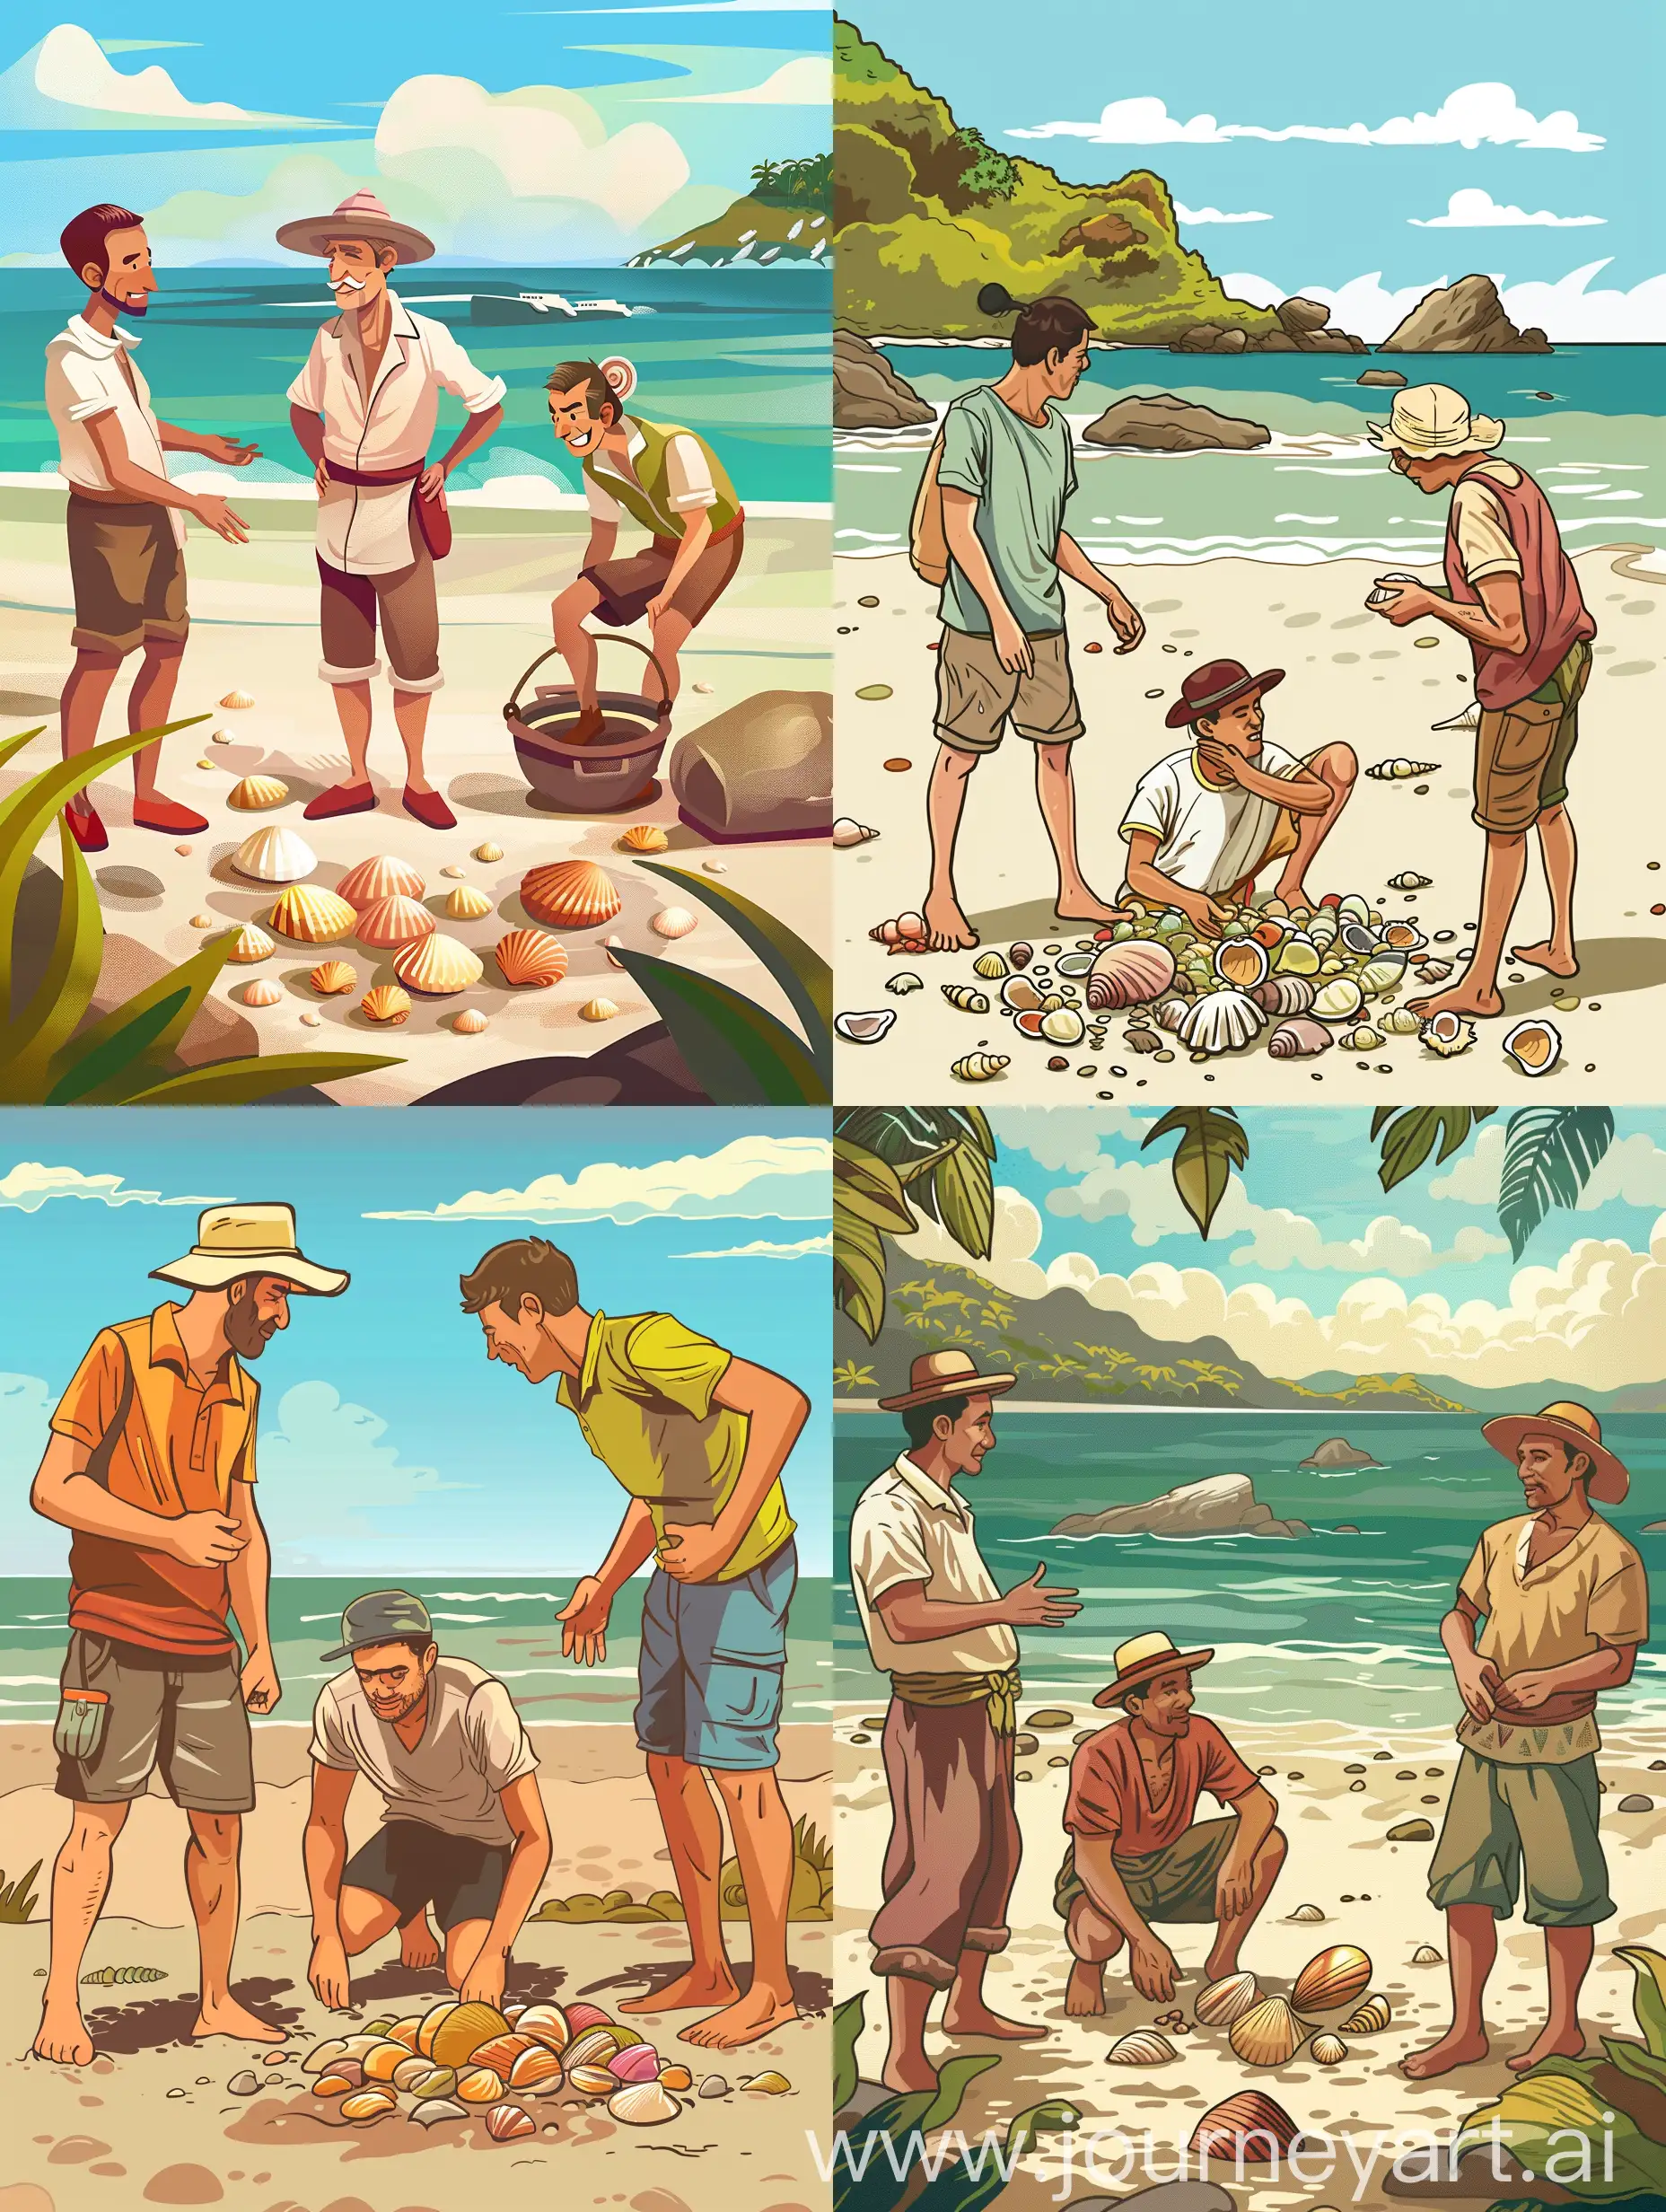 Spaniards talking to locals who are digging for shells on the beach philippines cartoon vector